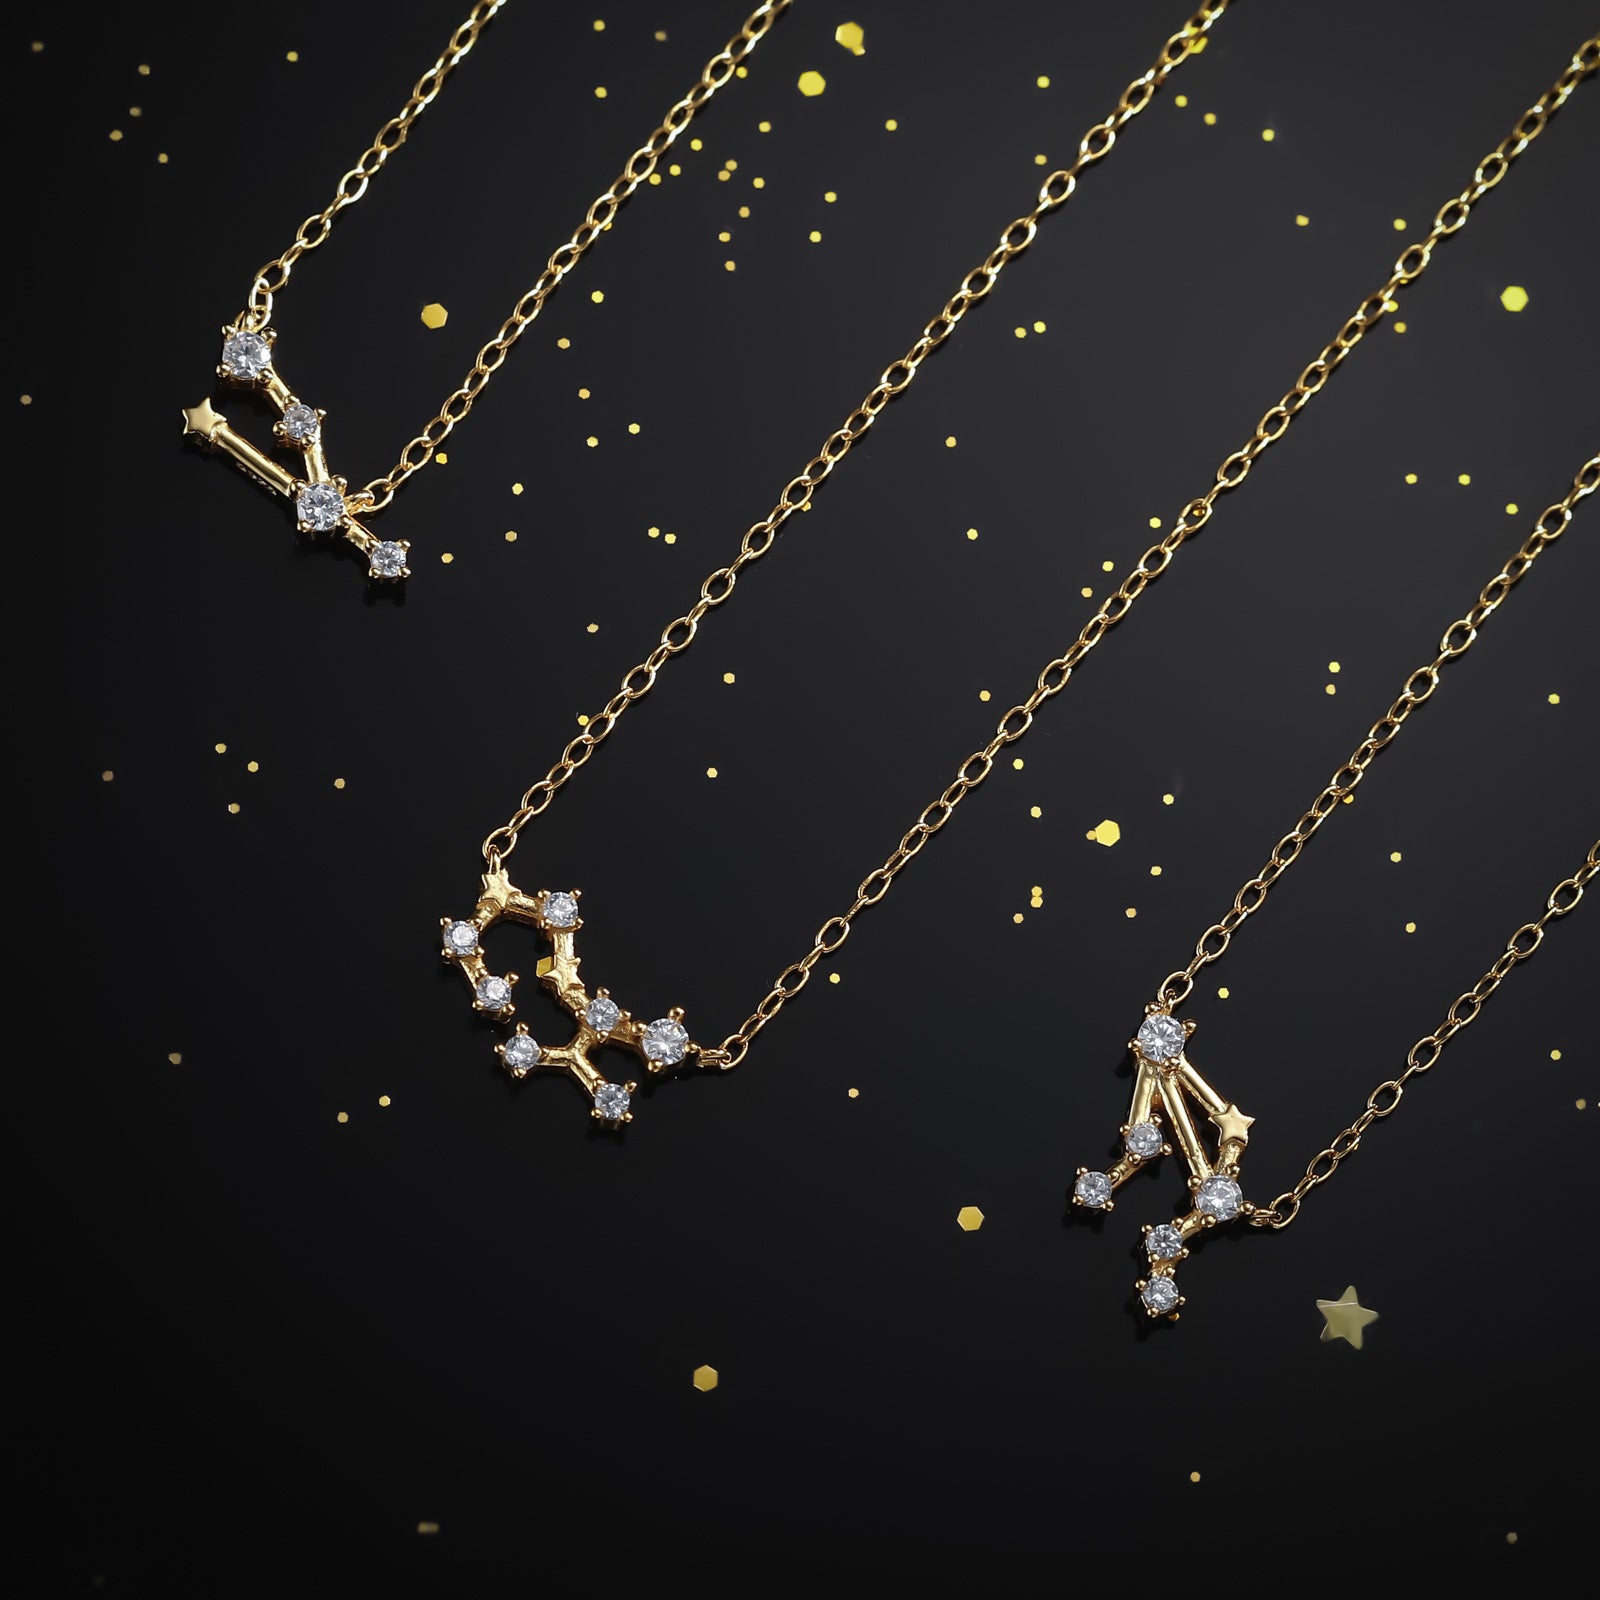 Constellation Silver Astrology Necklace Set